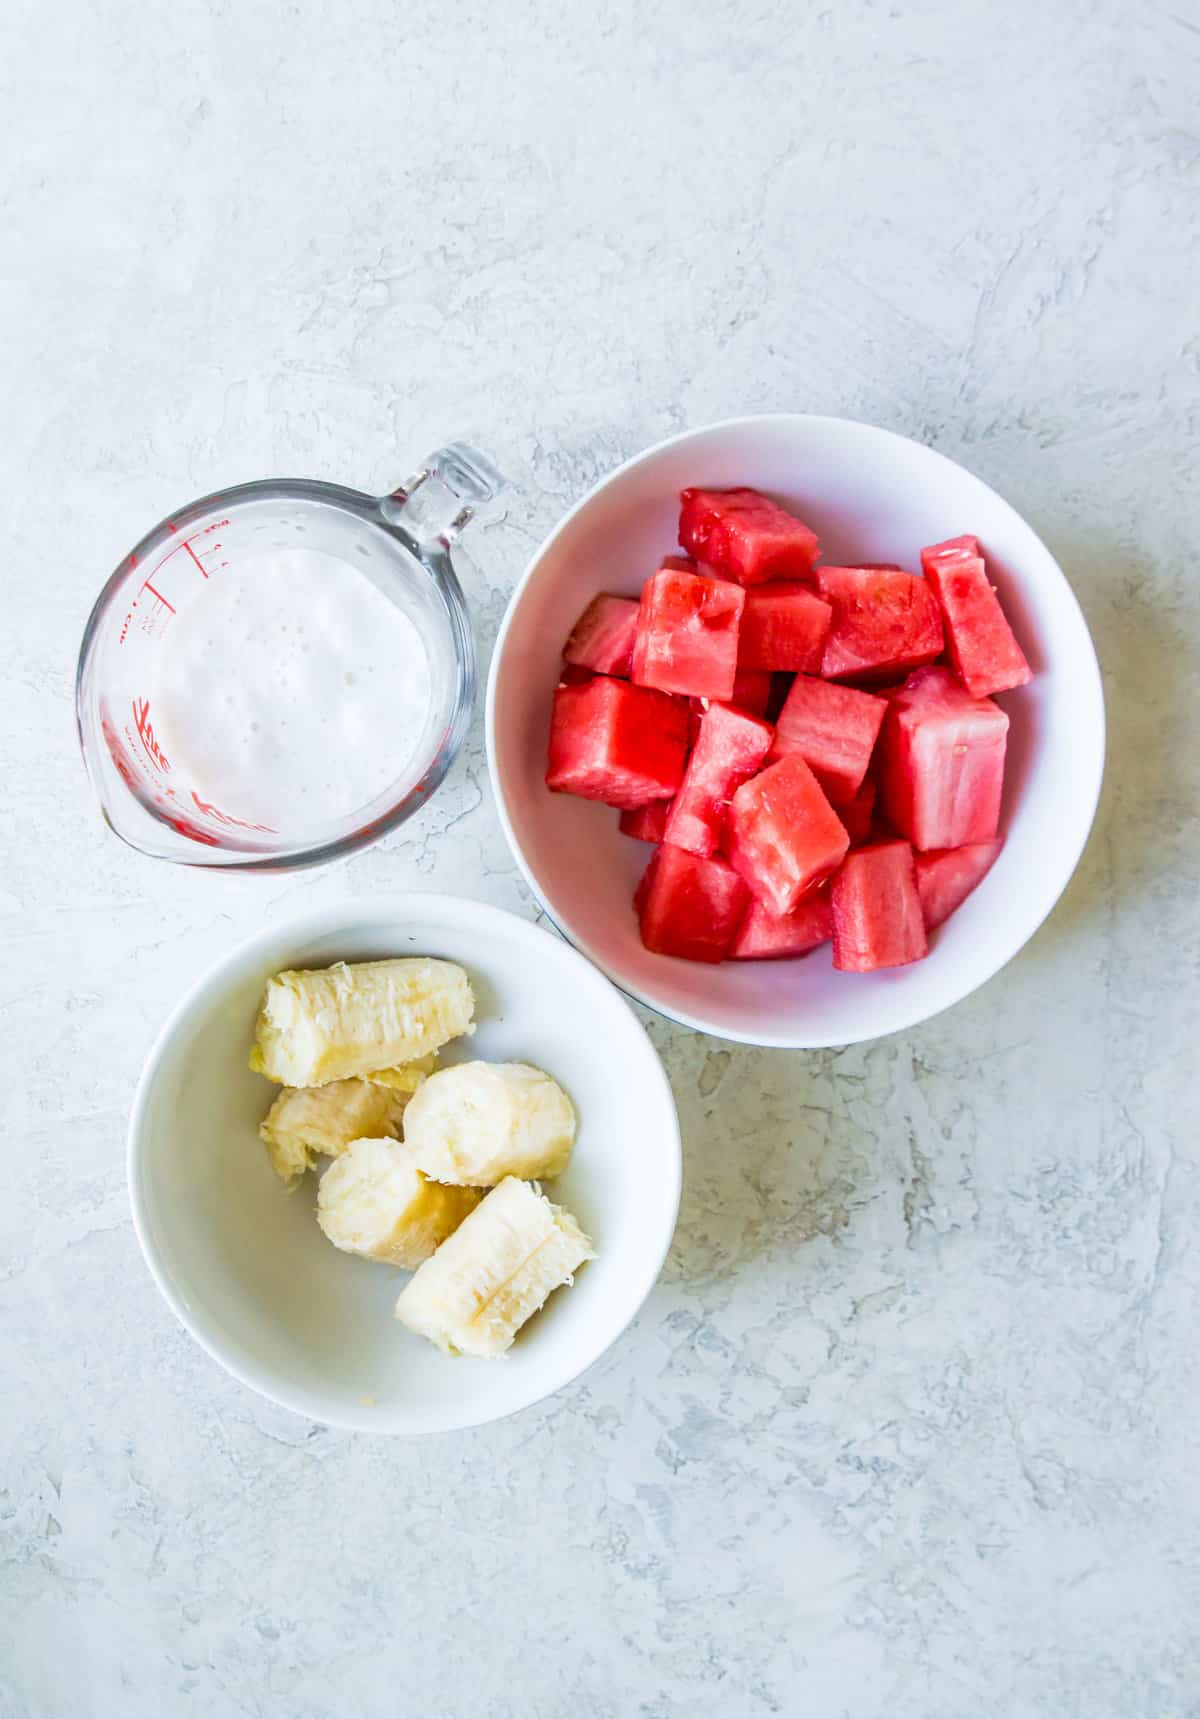 ingredients needed for making a watermelon and banana smoothie